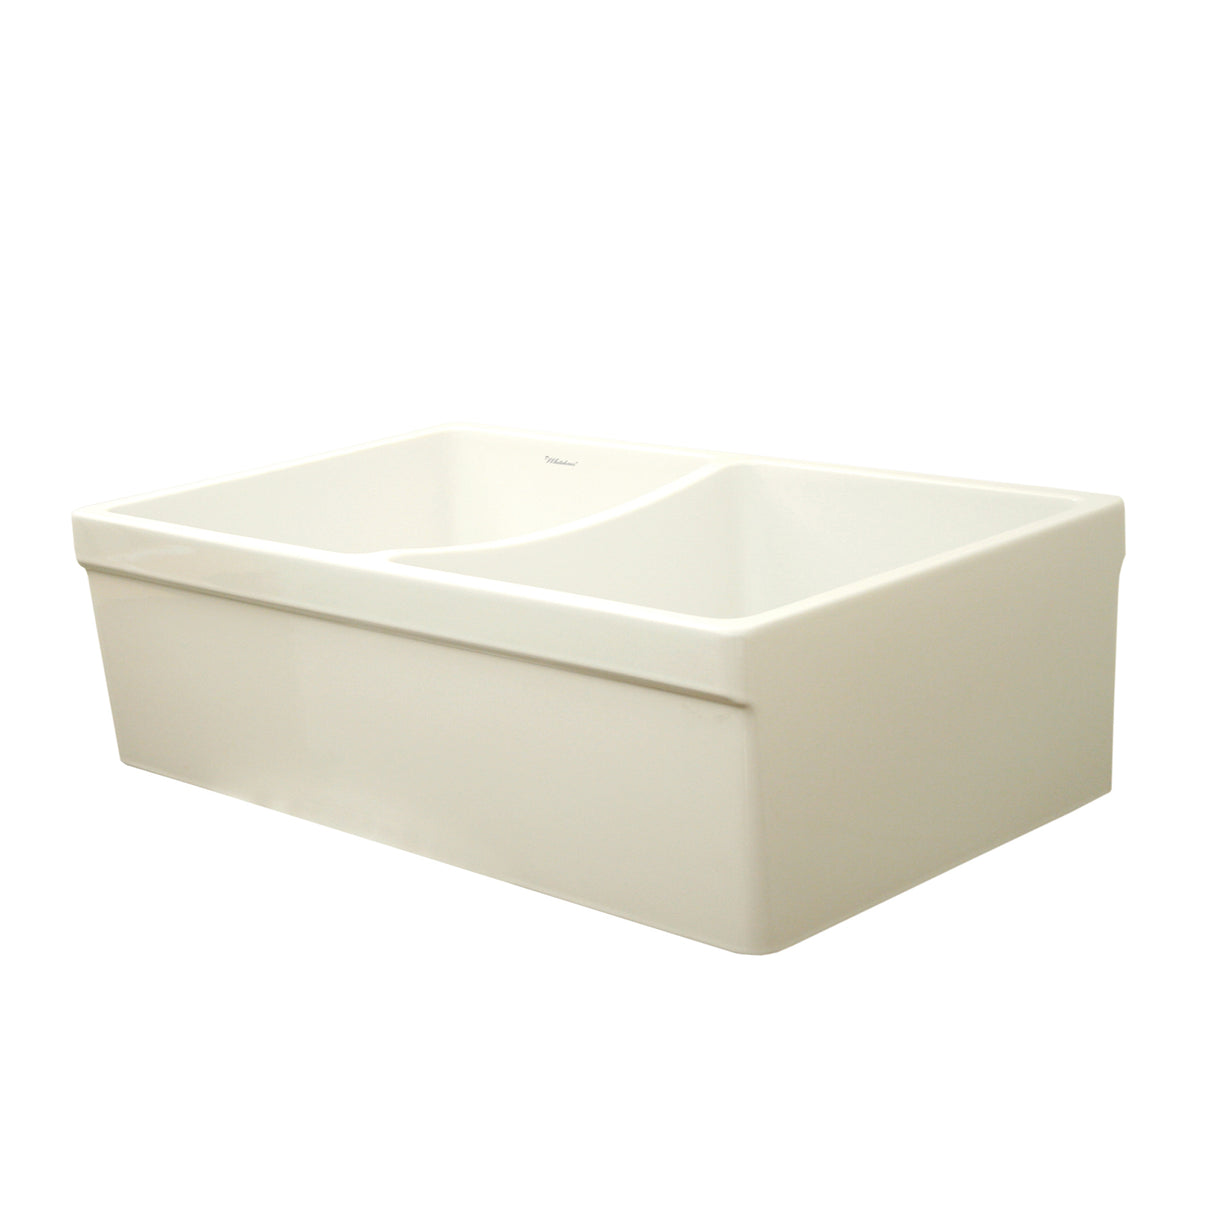 Farmhaus Fireclay Quatro Alcove Reversible Double Bowl Sink with 2" Lip on One Side and 2 ½" Lip on the Opposite Side